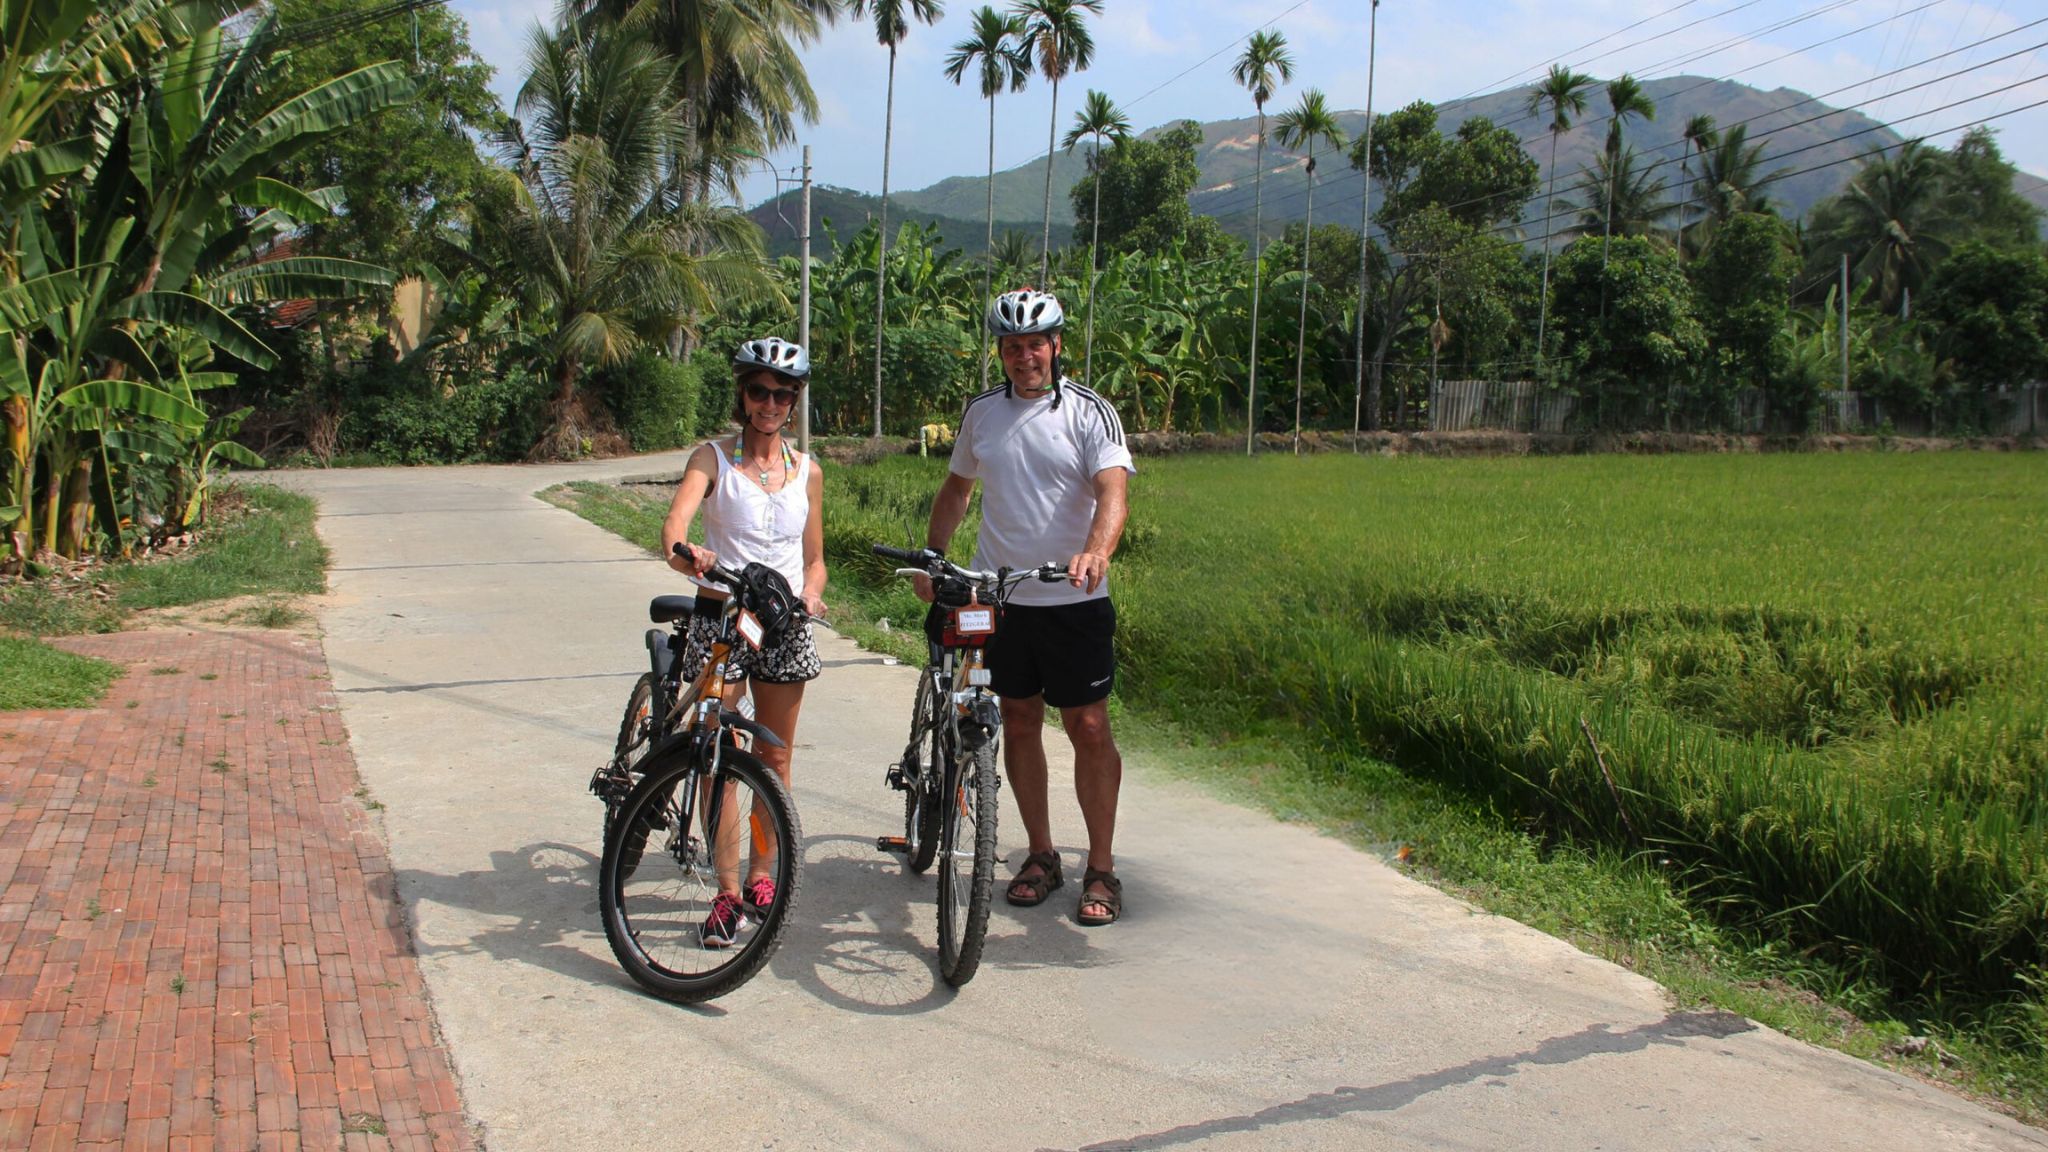 Day 3 Embark On An Exciting Bike Trip To Explore Nha Trang